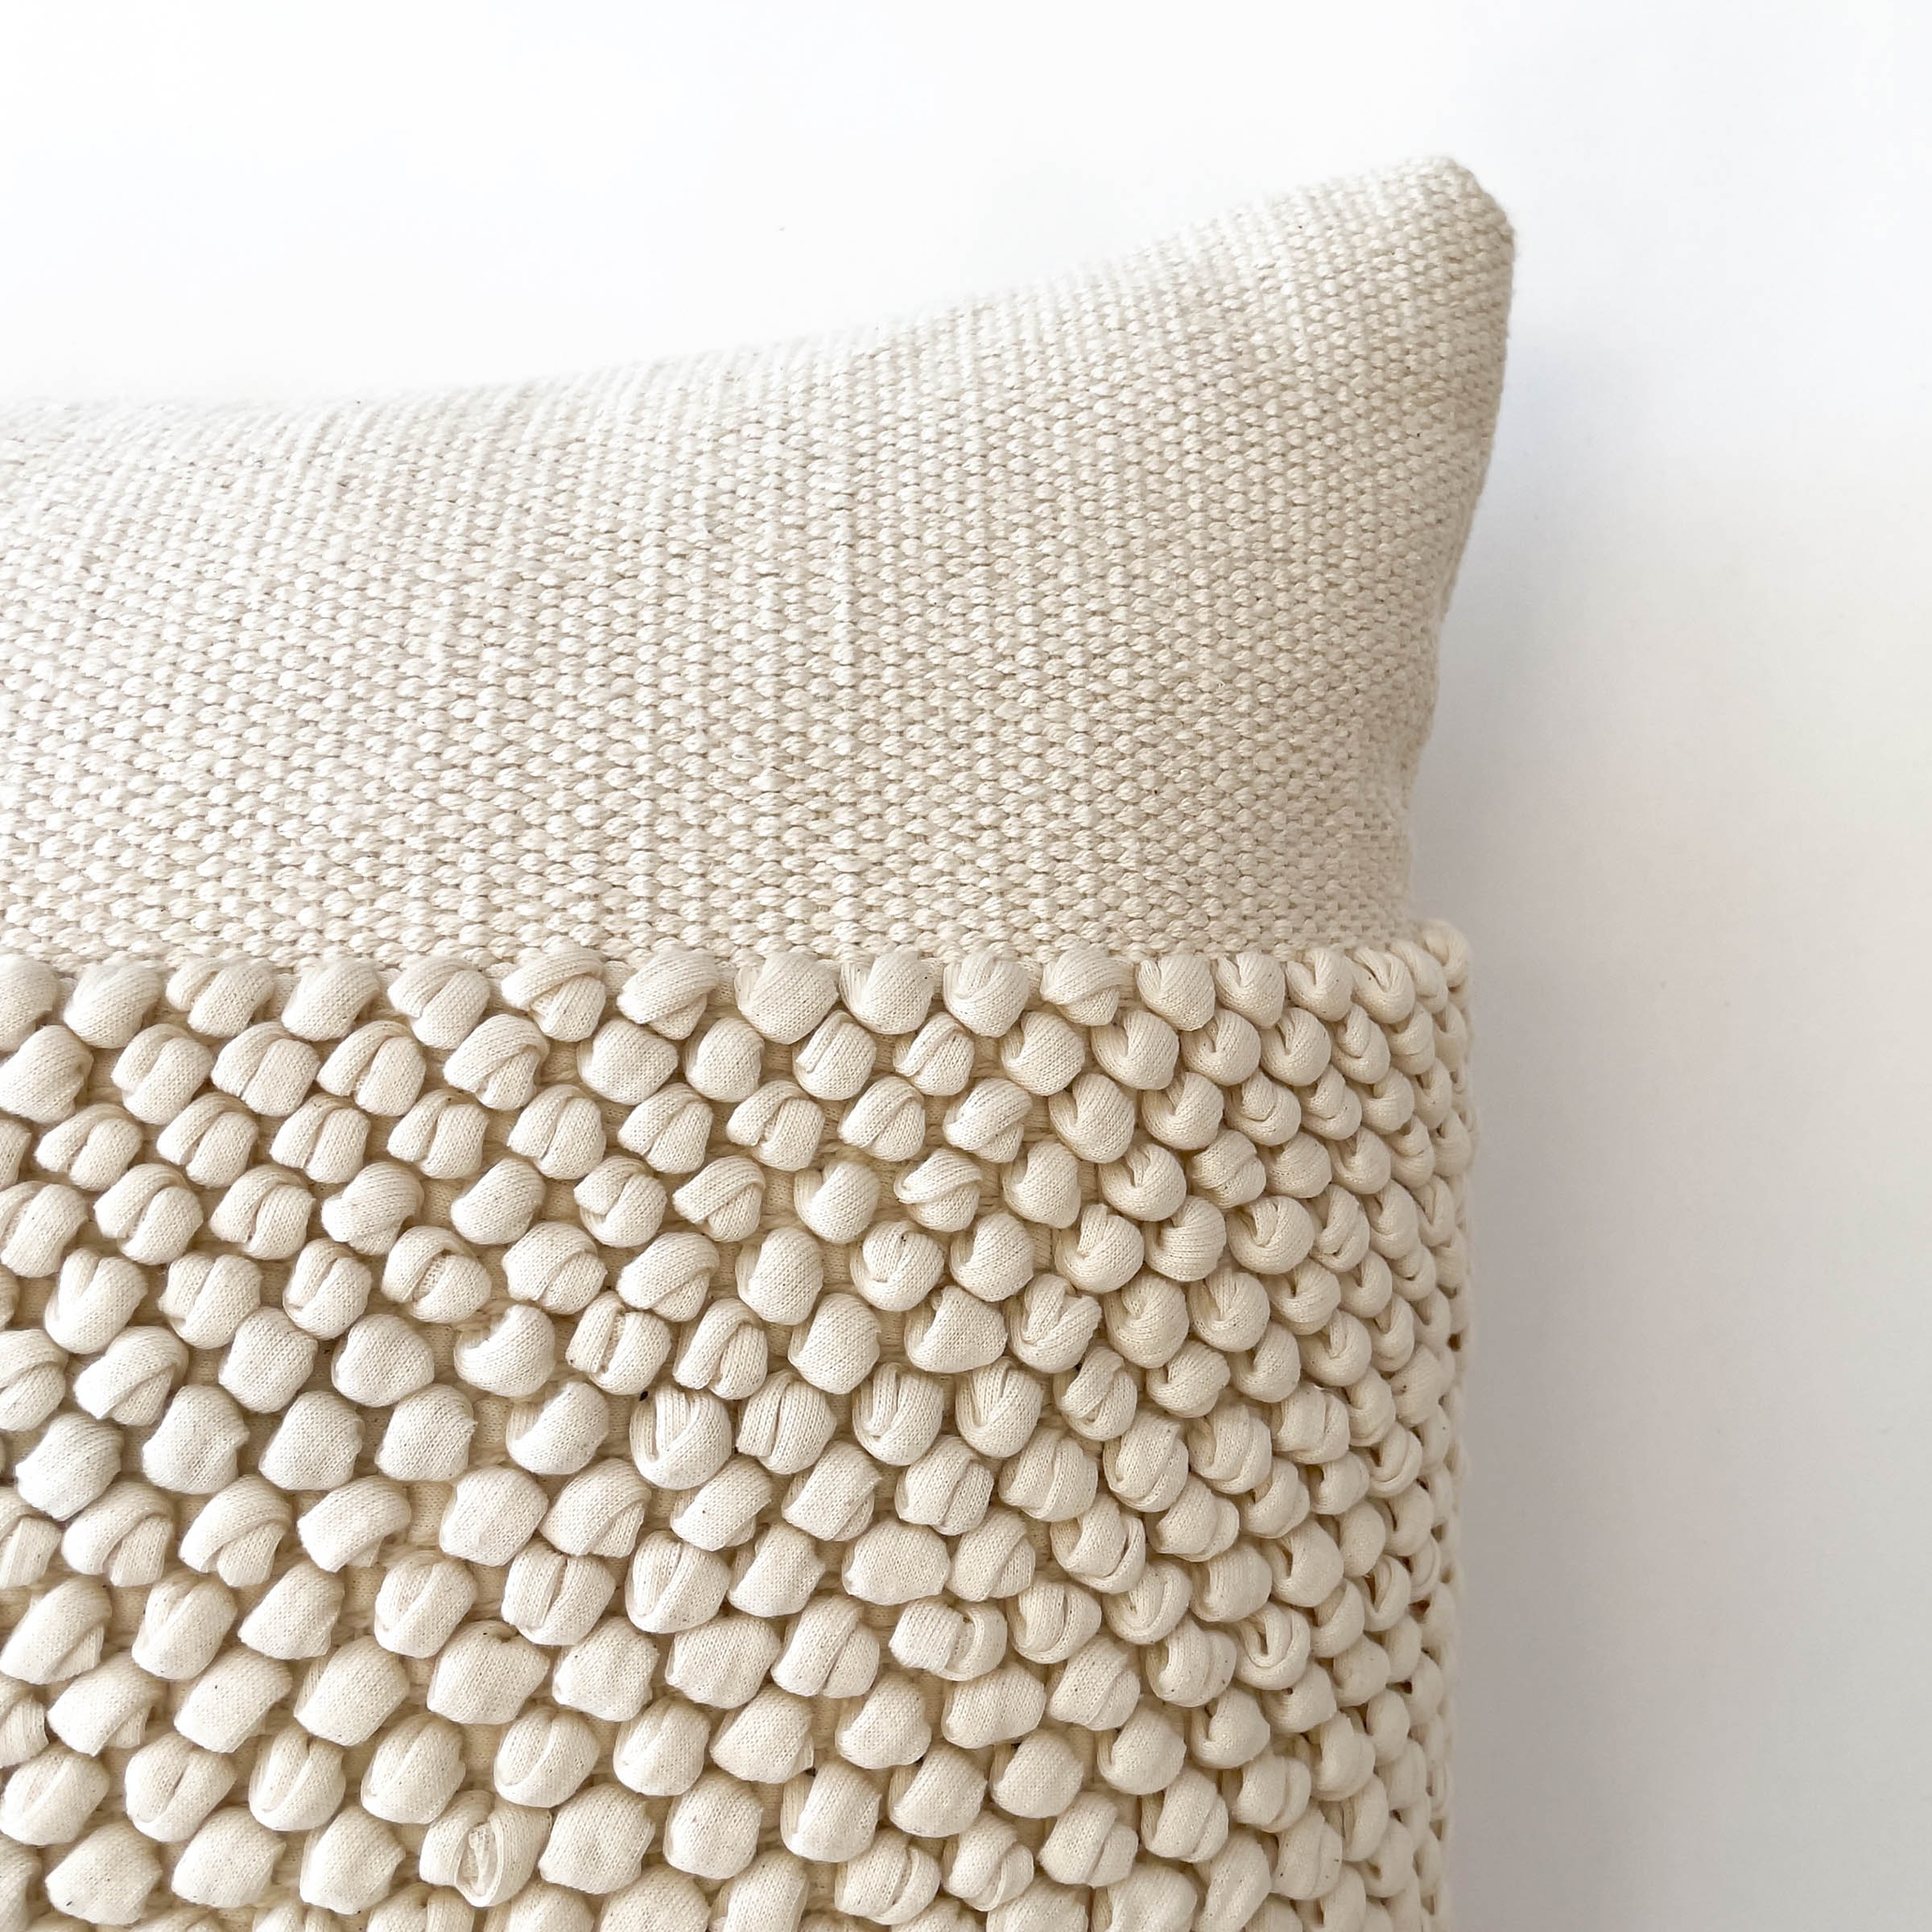 KELLY HANDWOVEN PILLOW - The Loomia